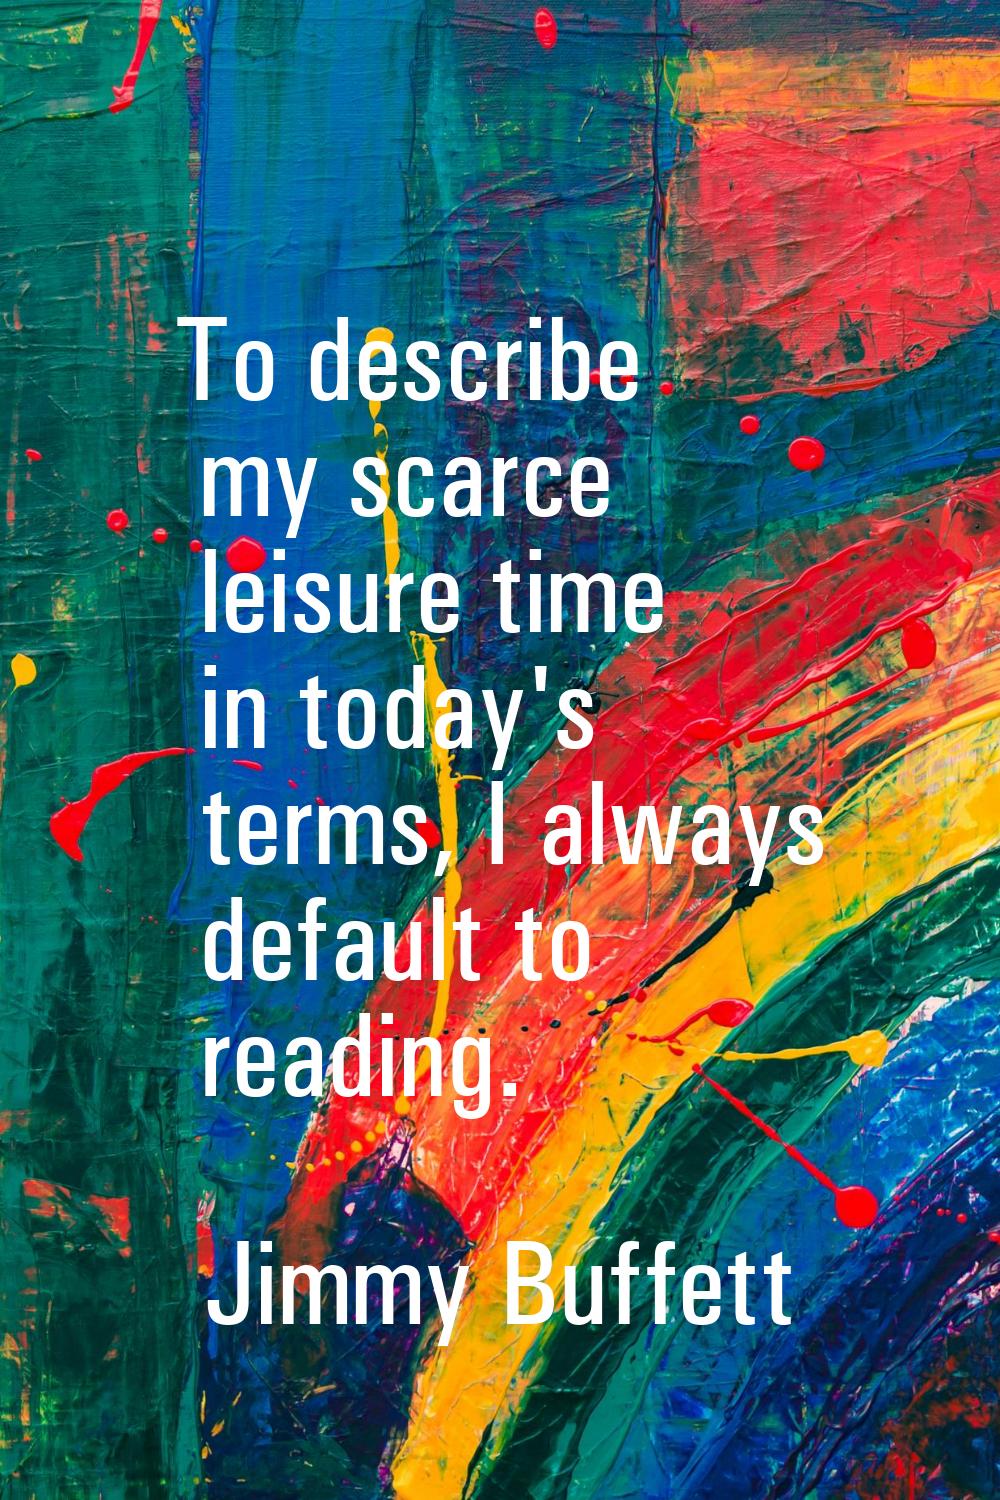 To describe my scarce leisure time in today's terms, I always default to reading.